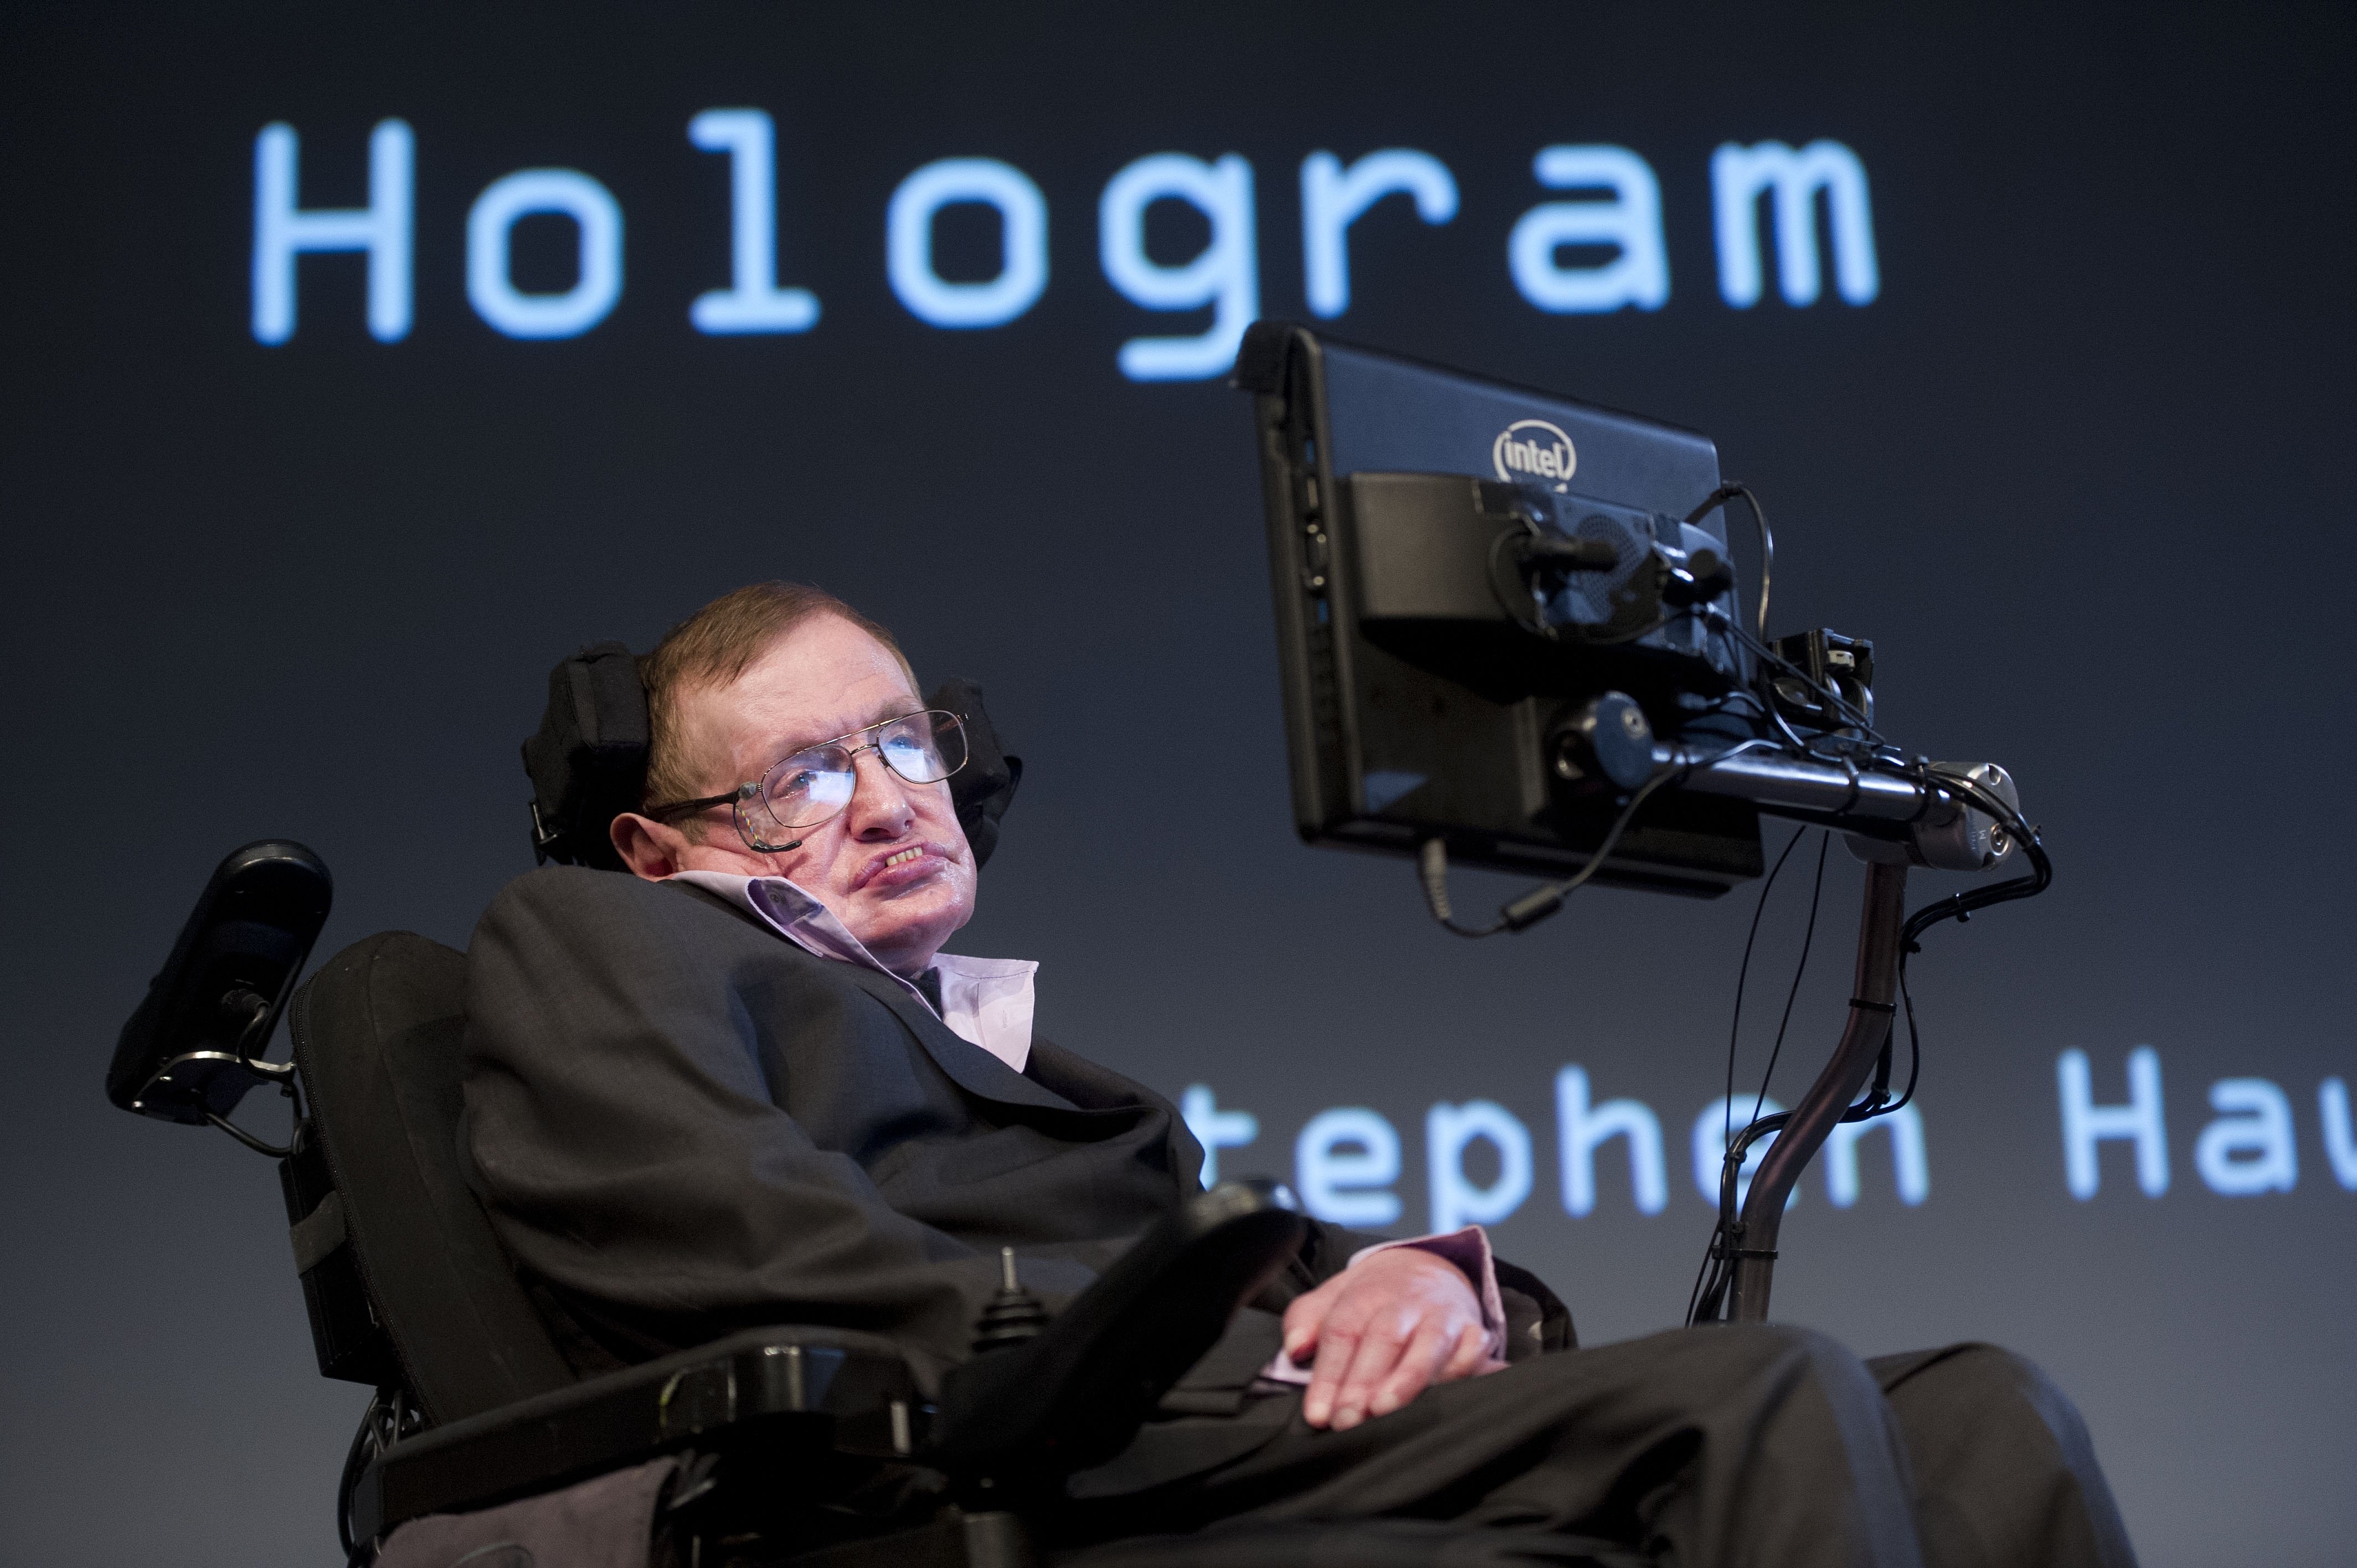 British theoretical physicist professor Stephen Hawking attends a symposium in Amsterdam on May 23, 2014. (Evert Elzinga—AFP/Getty Images)